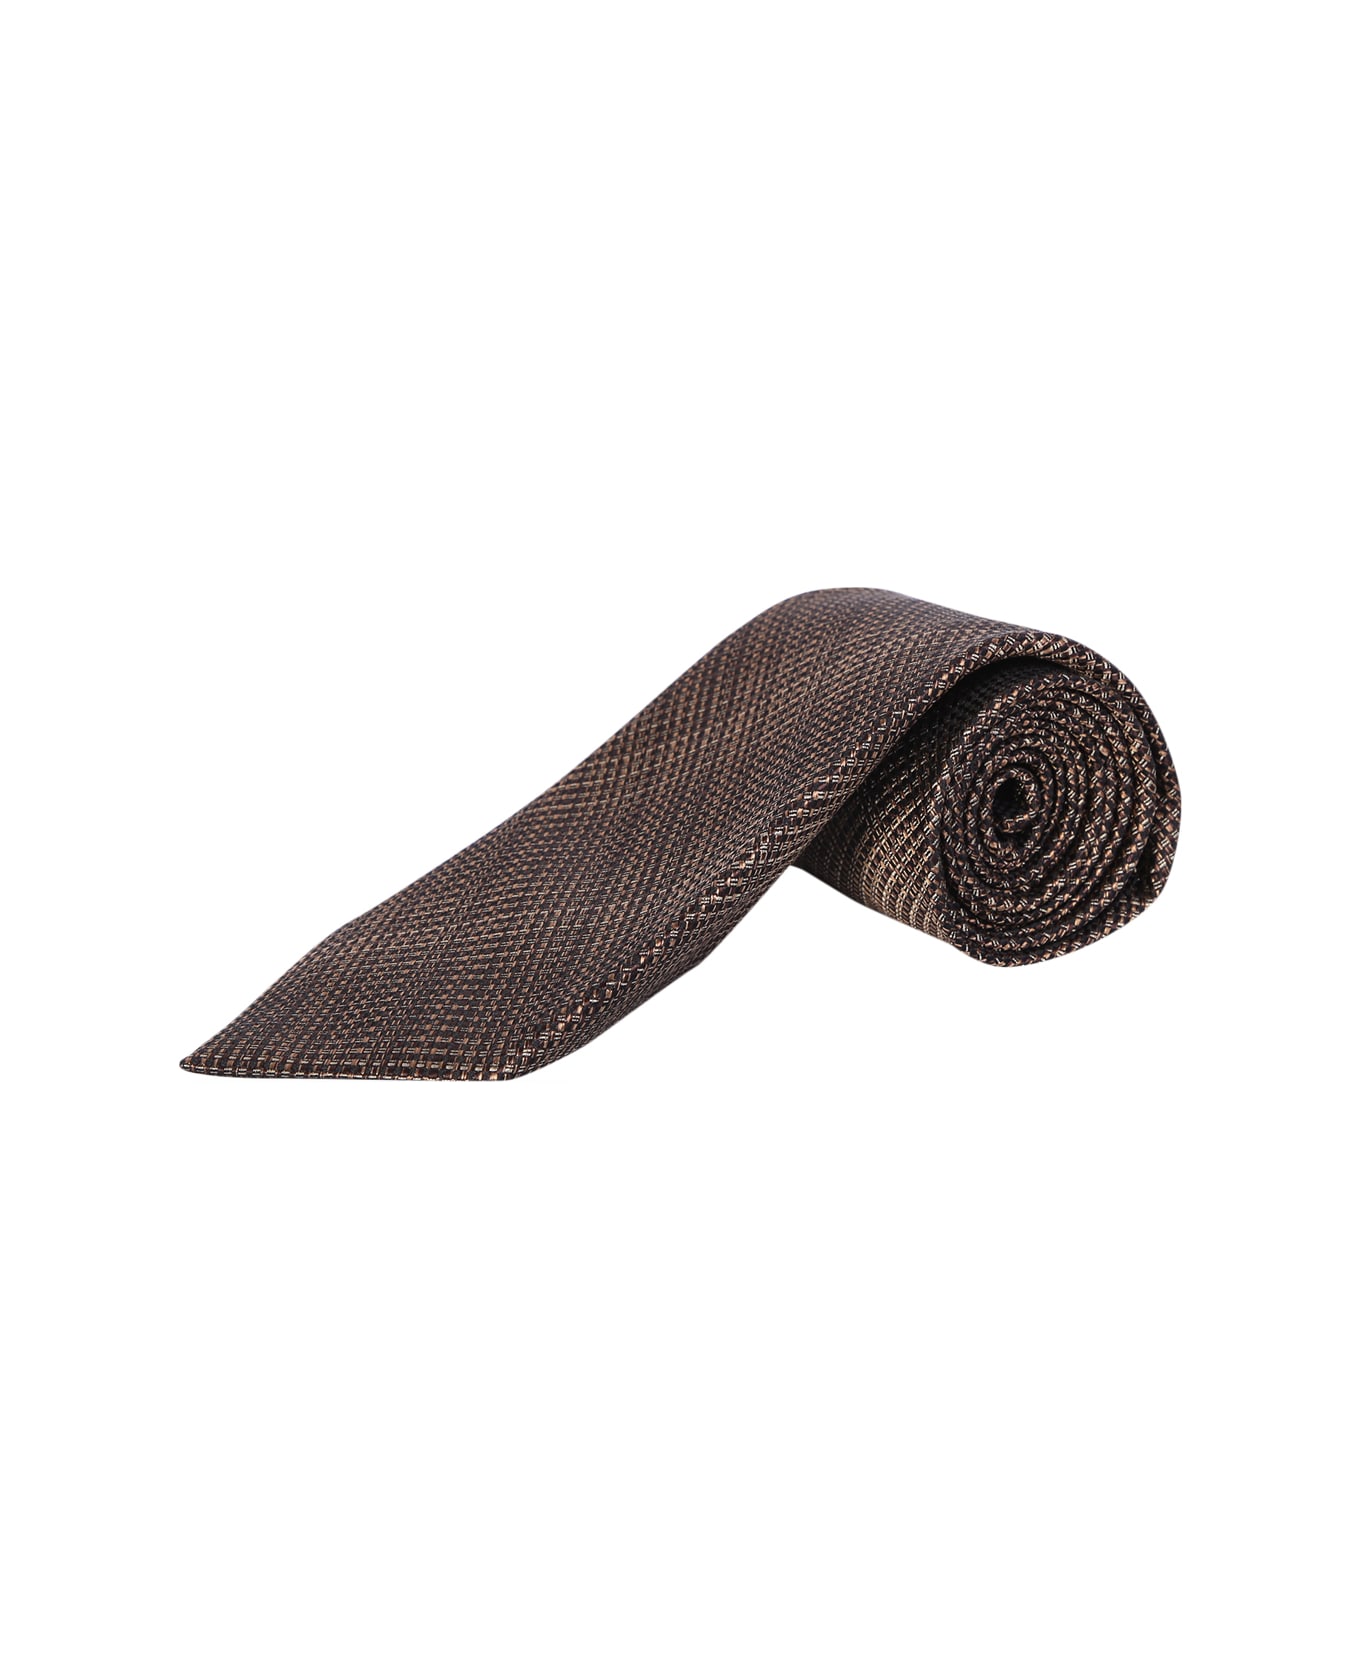 Tom Ford Micro-patterned Black And Beige Tie - Black